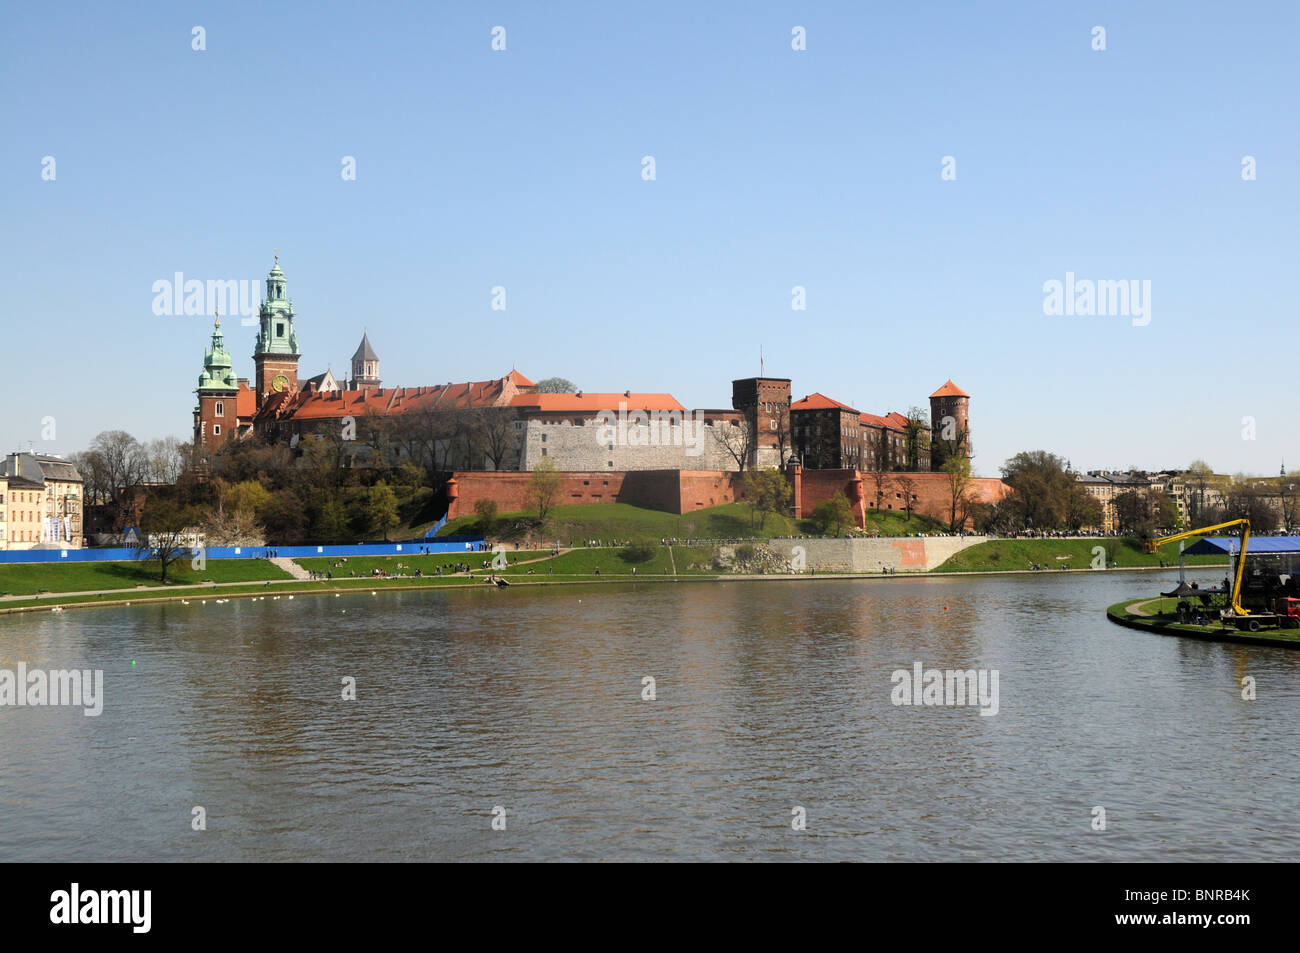 Wawel architectural complex with Wawel Castle and Cathedral turrets and Vistula River in Cracow, Poland Stock Photo